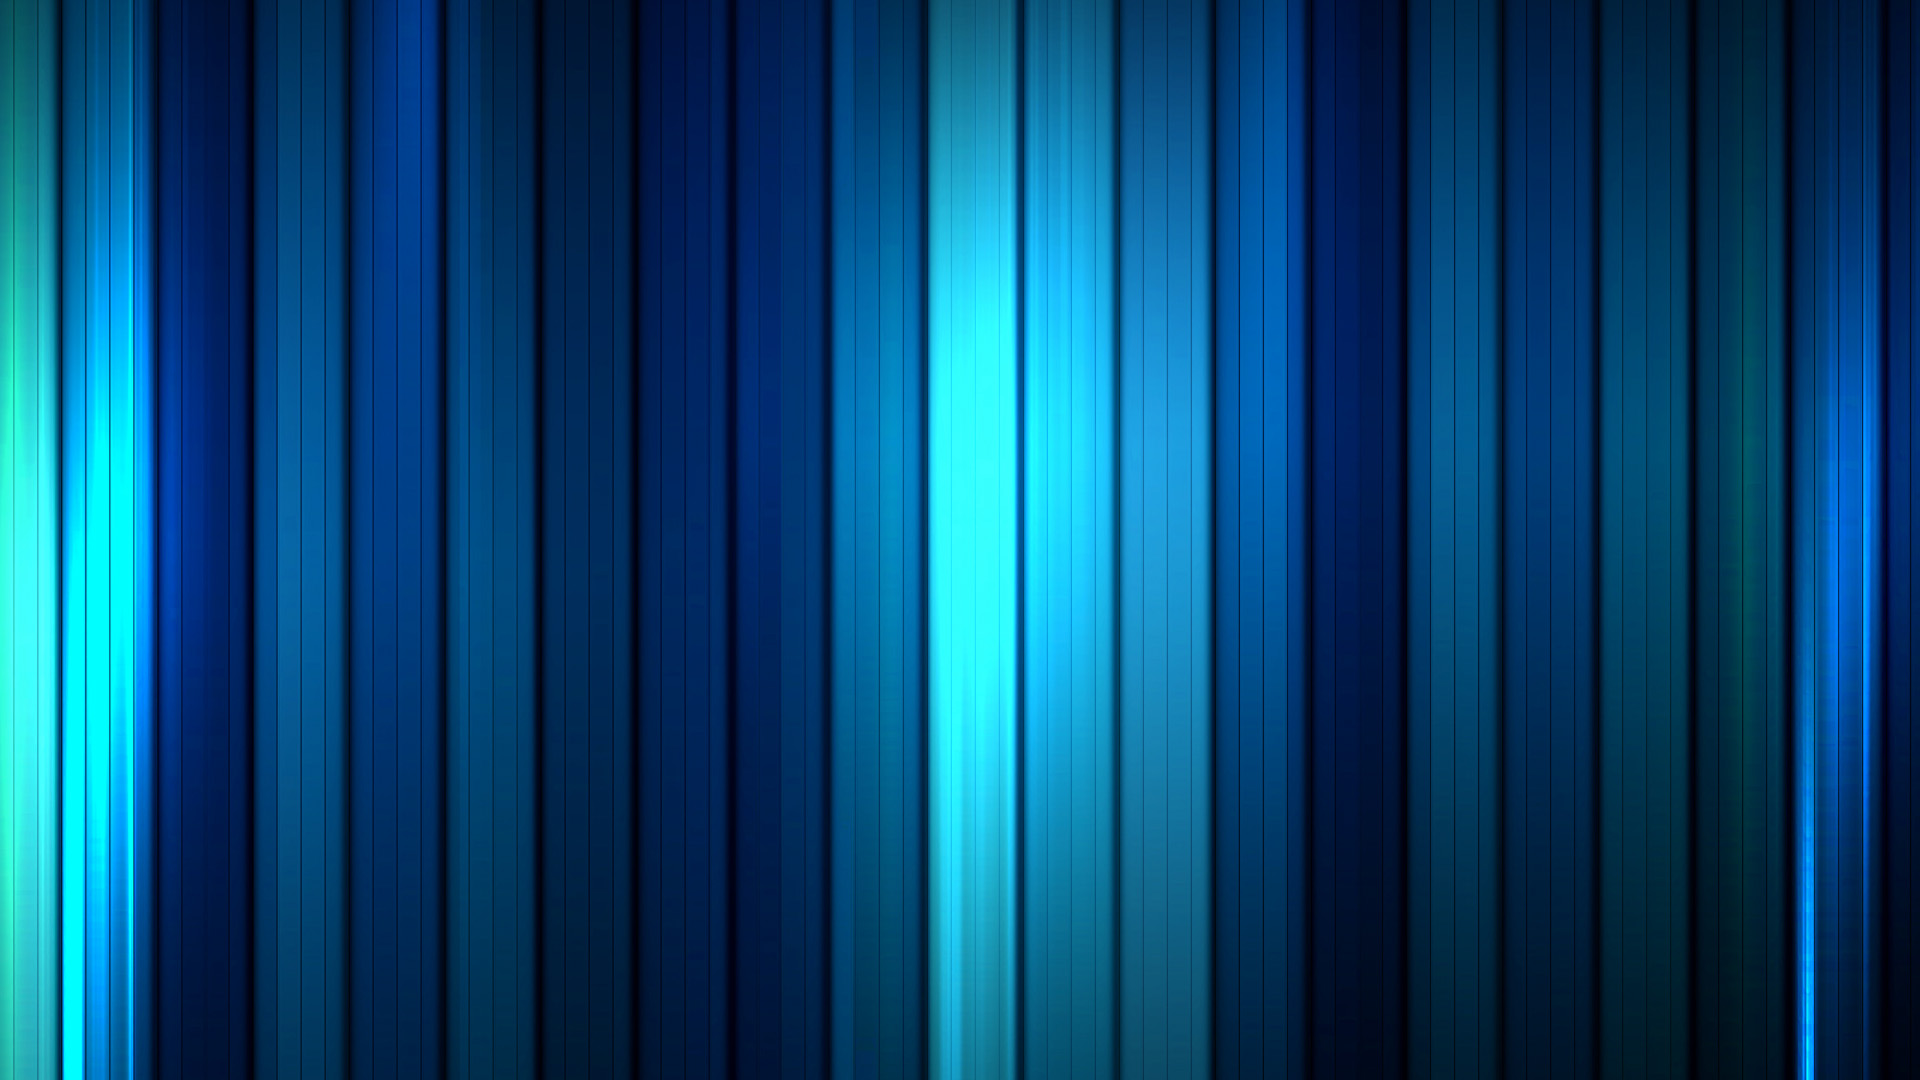 wallpaper images hd,blue,cobalt blue,turquoise,green,electric blue